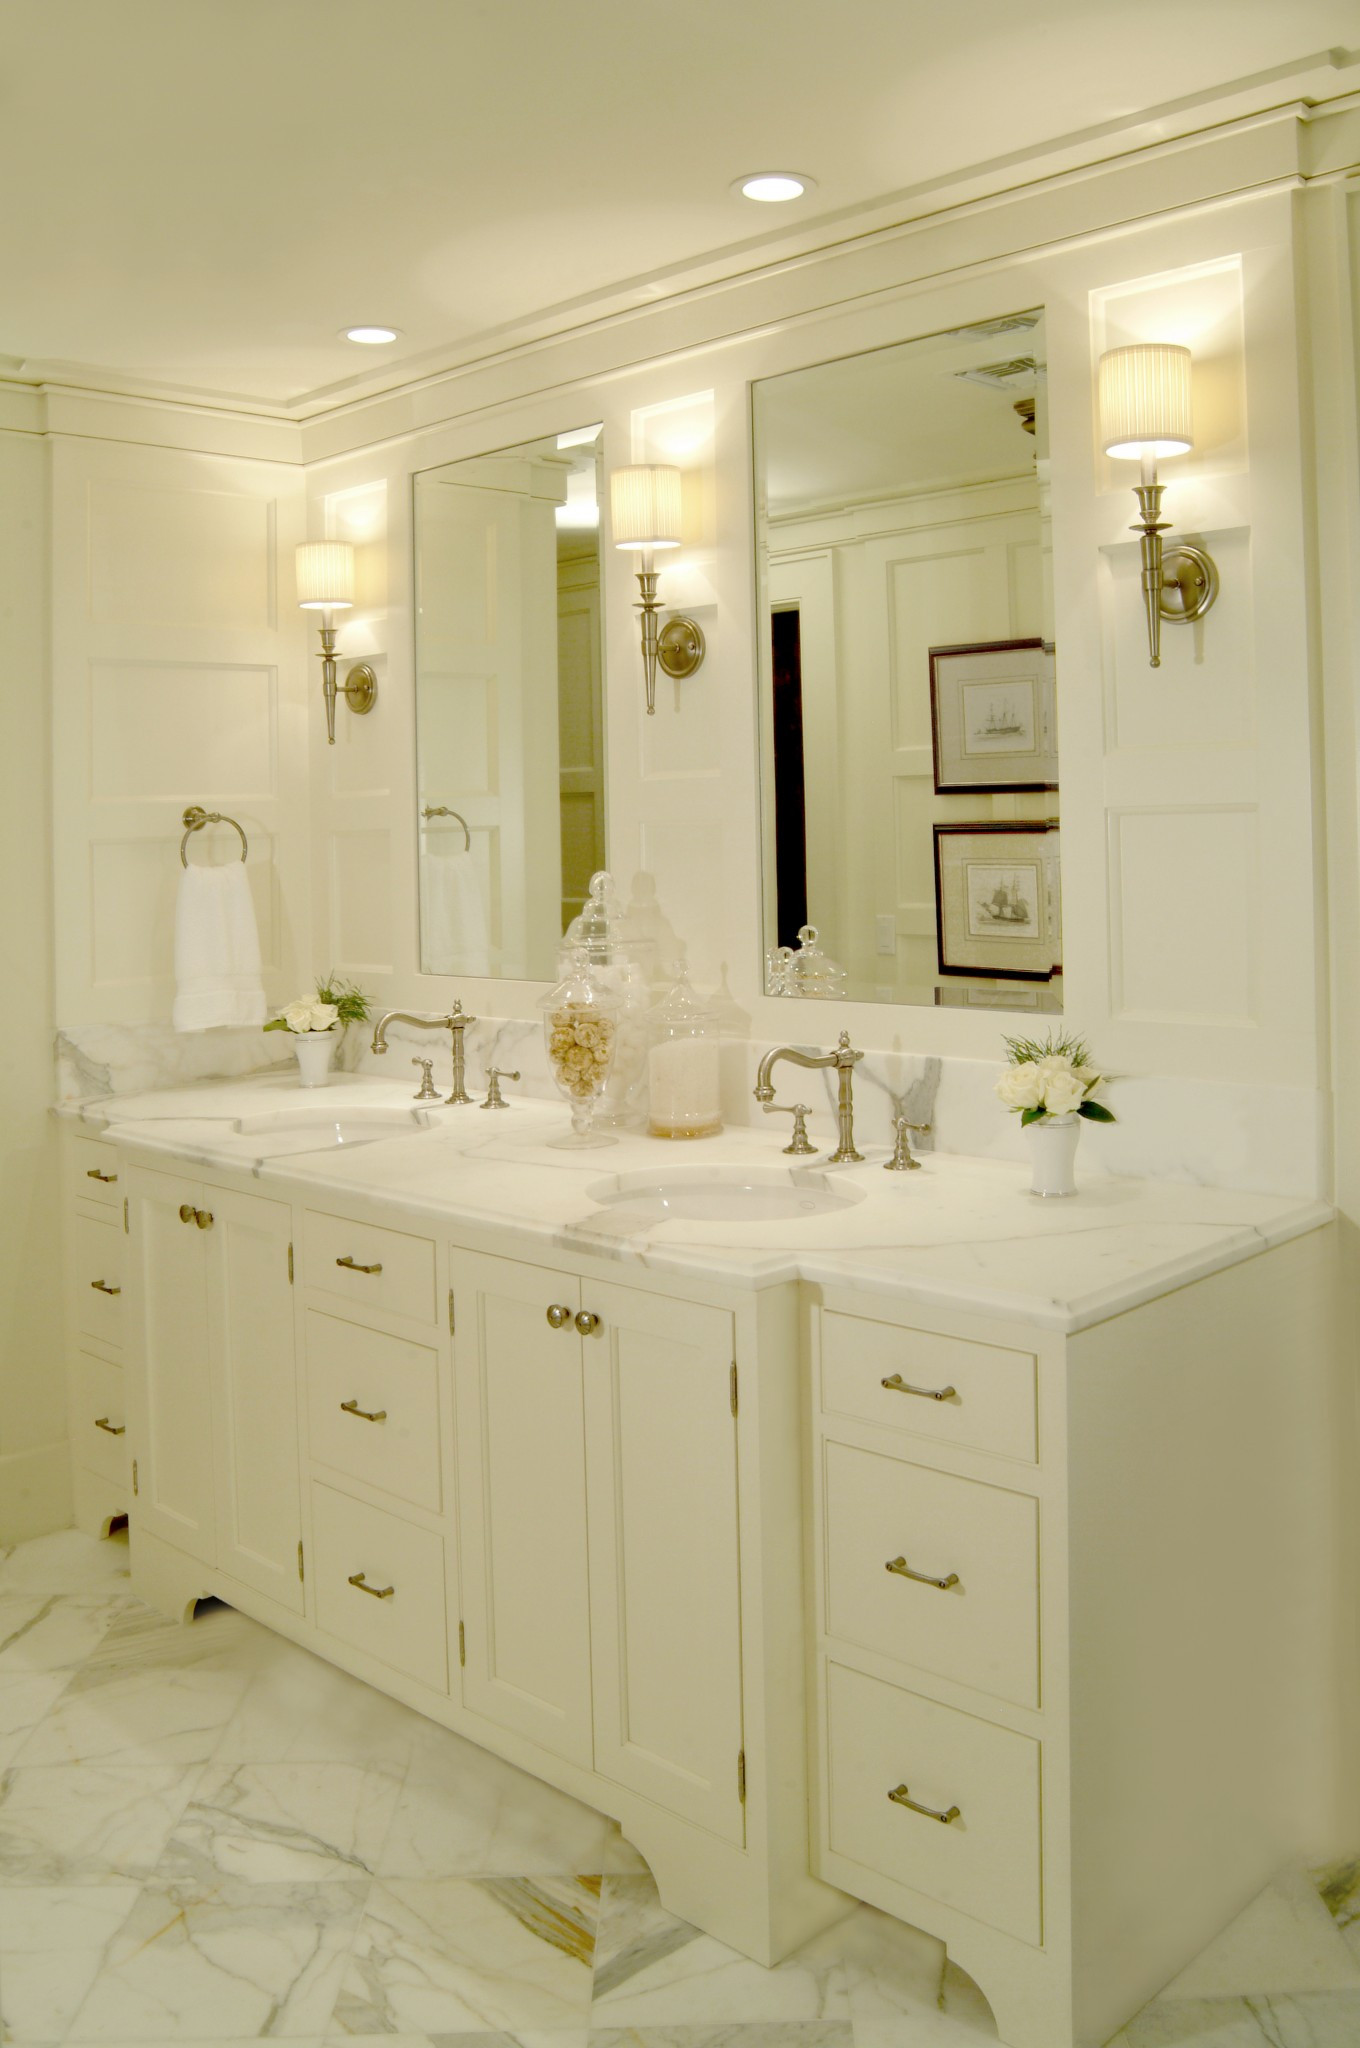 Wall Sconces For Bathroom Vanity
 Tips To Designing A Layered Lighting Plan For Your Master